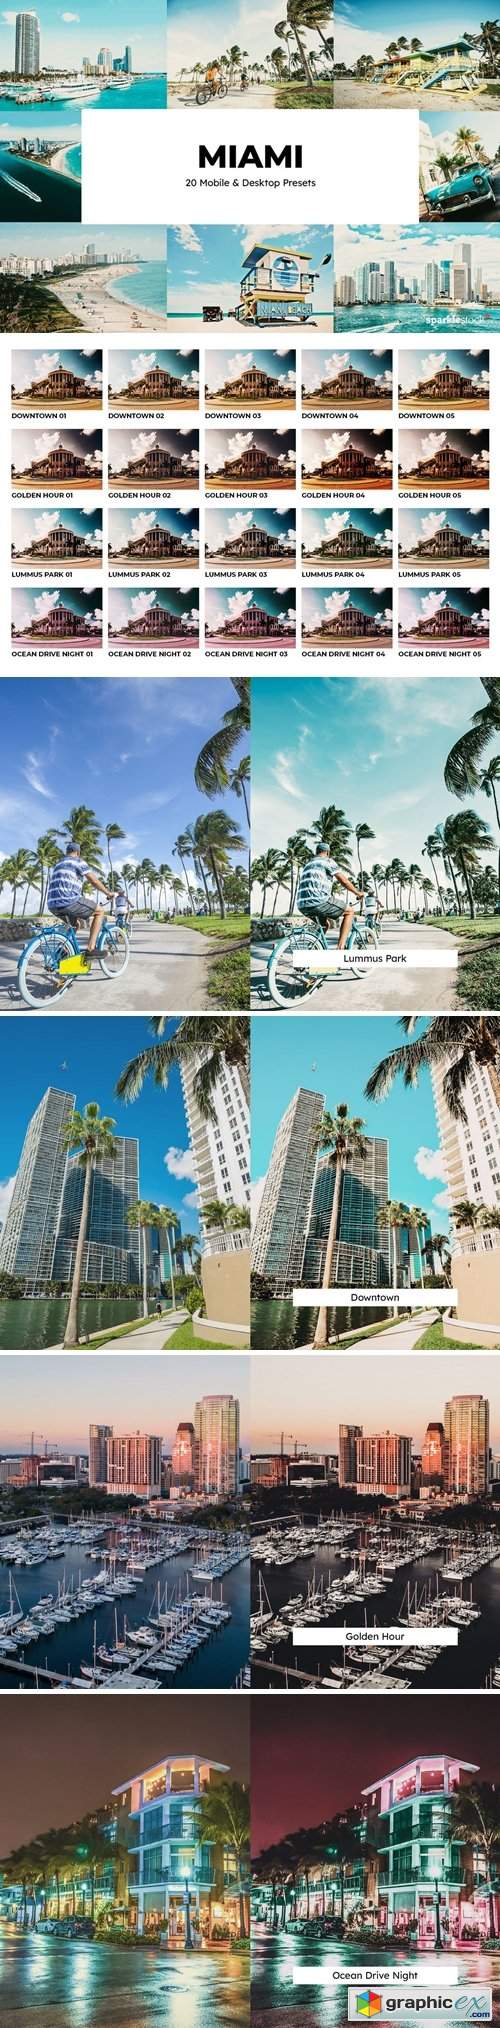  20 Miami Lightroom Presets and LUTs 